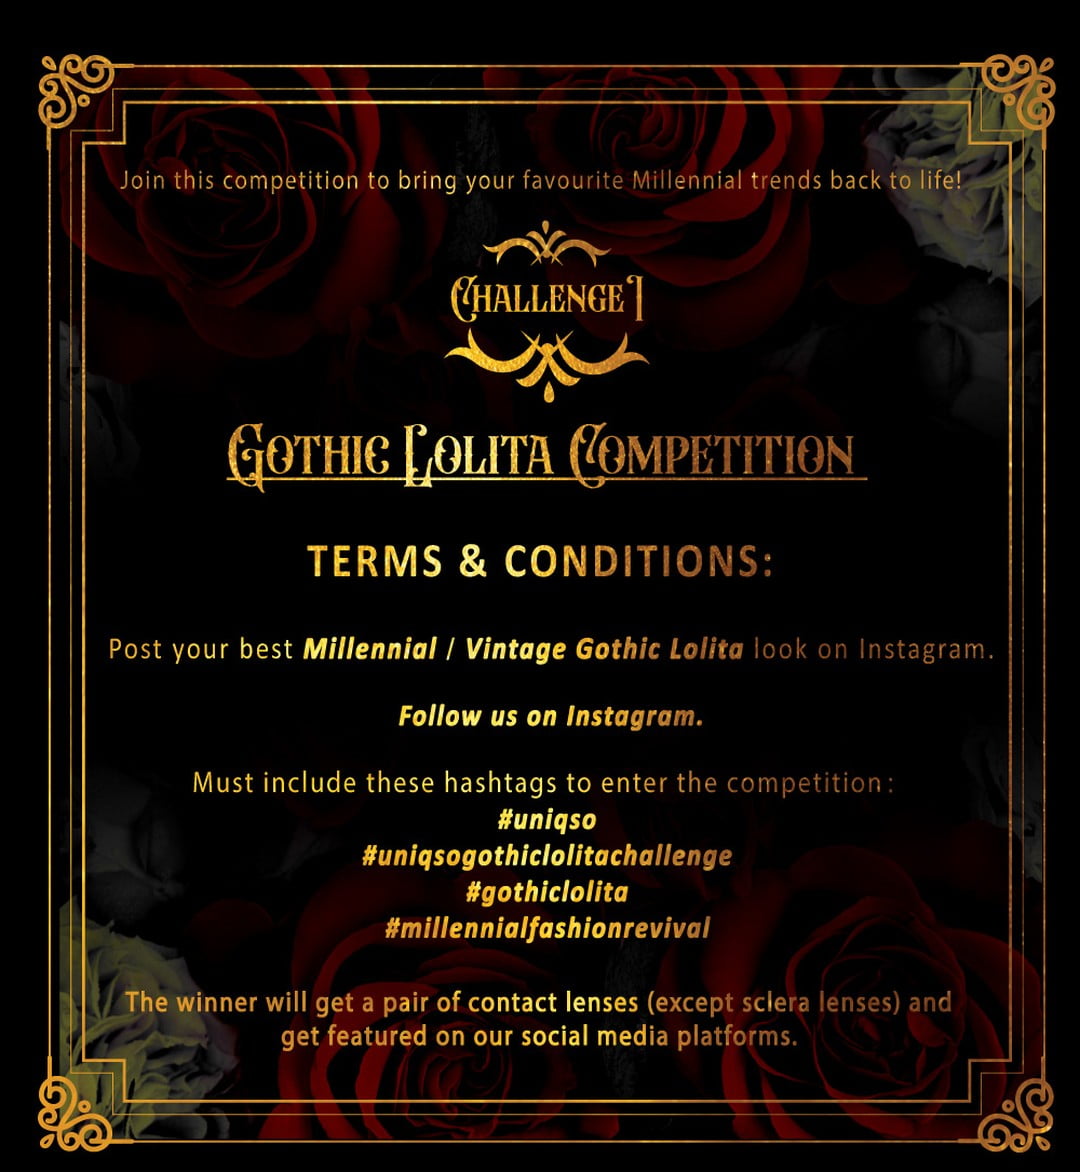 ðŸ¥€ CHALLENGE I : Gothic Lolita Competition ðŸ¥€

We encourage you to join this competition to bring your favourite Millennial trends back to life âœ¨
What are you waiting for â�‰ï¸�

â€¼ï¸� Terms and Conditions â€¼ï¸�
1. Post your best millennial Gothic Lolita look on Instagram.
2. Follow us on Instagram.
3. Must include these 4 hashtags below to enter the competition.
#UNIQSO #UNIQSOGothicLolitaChallenge #gothiclolita #MillennialFashionRevival 

âš ï¸� For more information on this challenge, kindly refer to our latest Instagram Feed ðŸ¥€

The winner will get a pair of contact lenses (except sclera lenses) and get featured on our social media platforms, such as newsletter, Instagram and Facebook.

Starting 2nd May 2022 till 15th May 2022

GOOD LUCK ðŸ¦‡
.
.
#uniqso #beunique #ã‚³ã‚¹ãƒ—ãƒ¬ #ã‚«ãƒ©ã‚³ãƒ³é€šè²© #é€�æ–™ç„¡æ–™ #ì½˜í…�íŠ¸ë Œì¦ˆ #kontaktlinse #ã‚«ãƒ©ãƒ¼ã‚³ãƒ³ã‚¿ã‚¯ãƒˆ #goth #gothic #challengestart 

#UNIQSOGothicLolitaChallenge #gothiclolita #MillennialFashionRevival